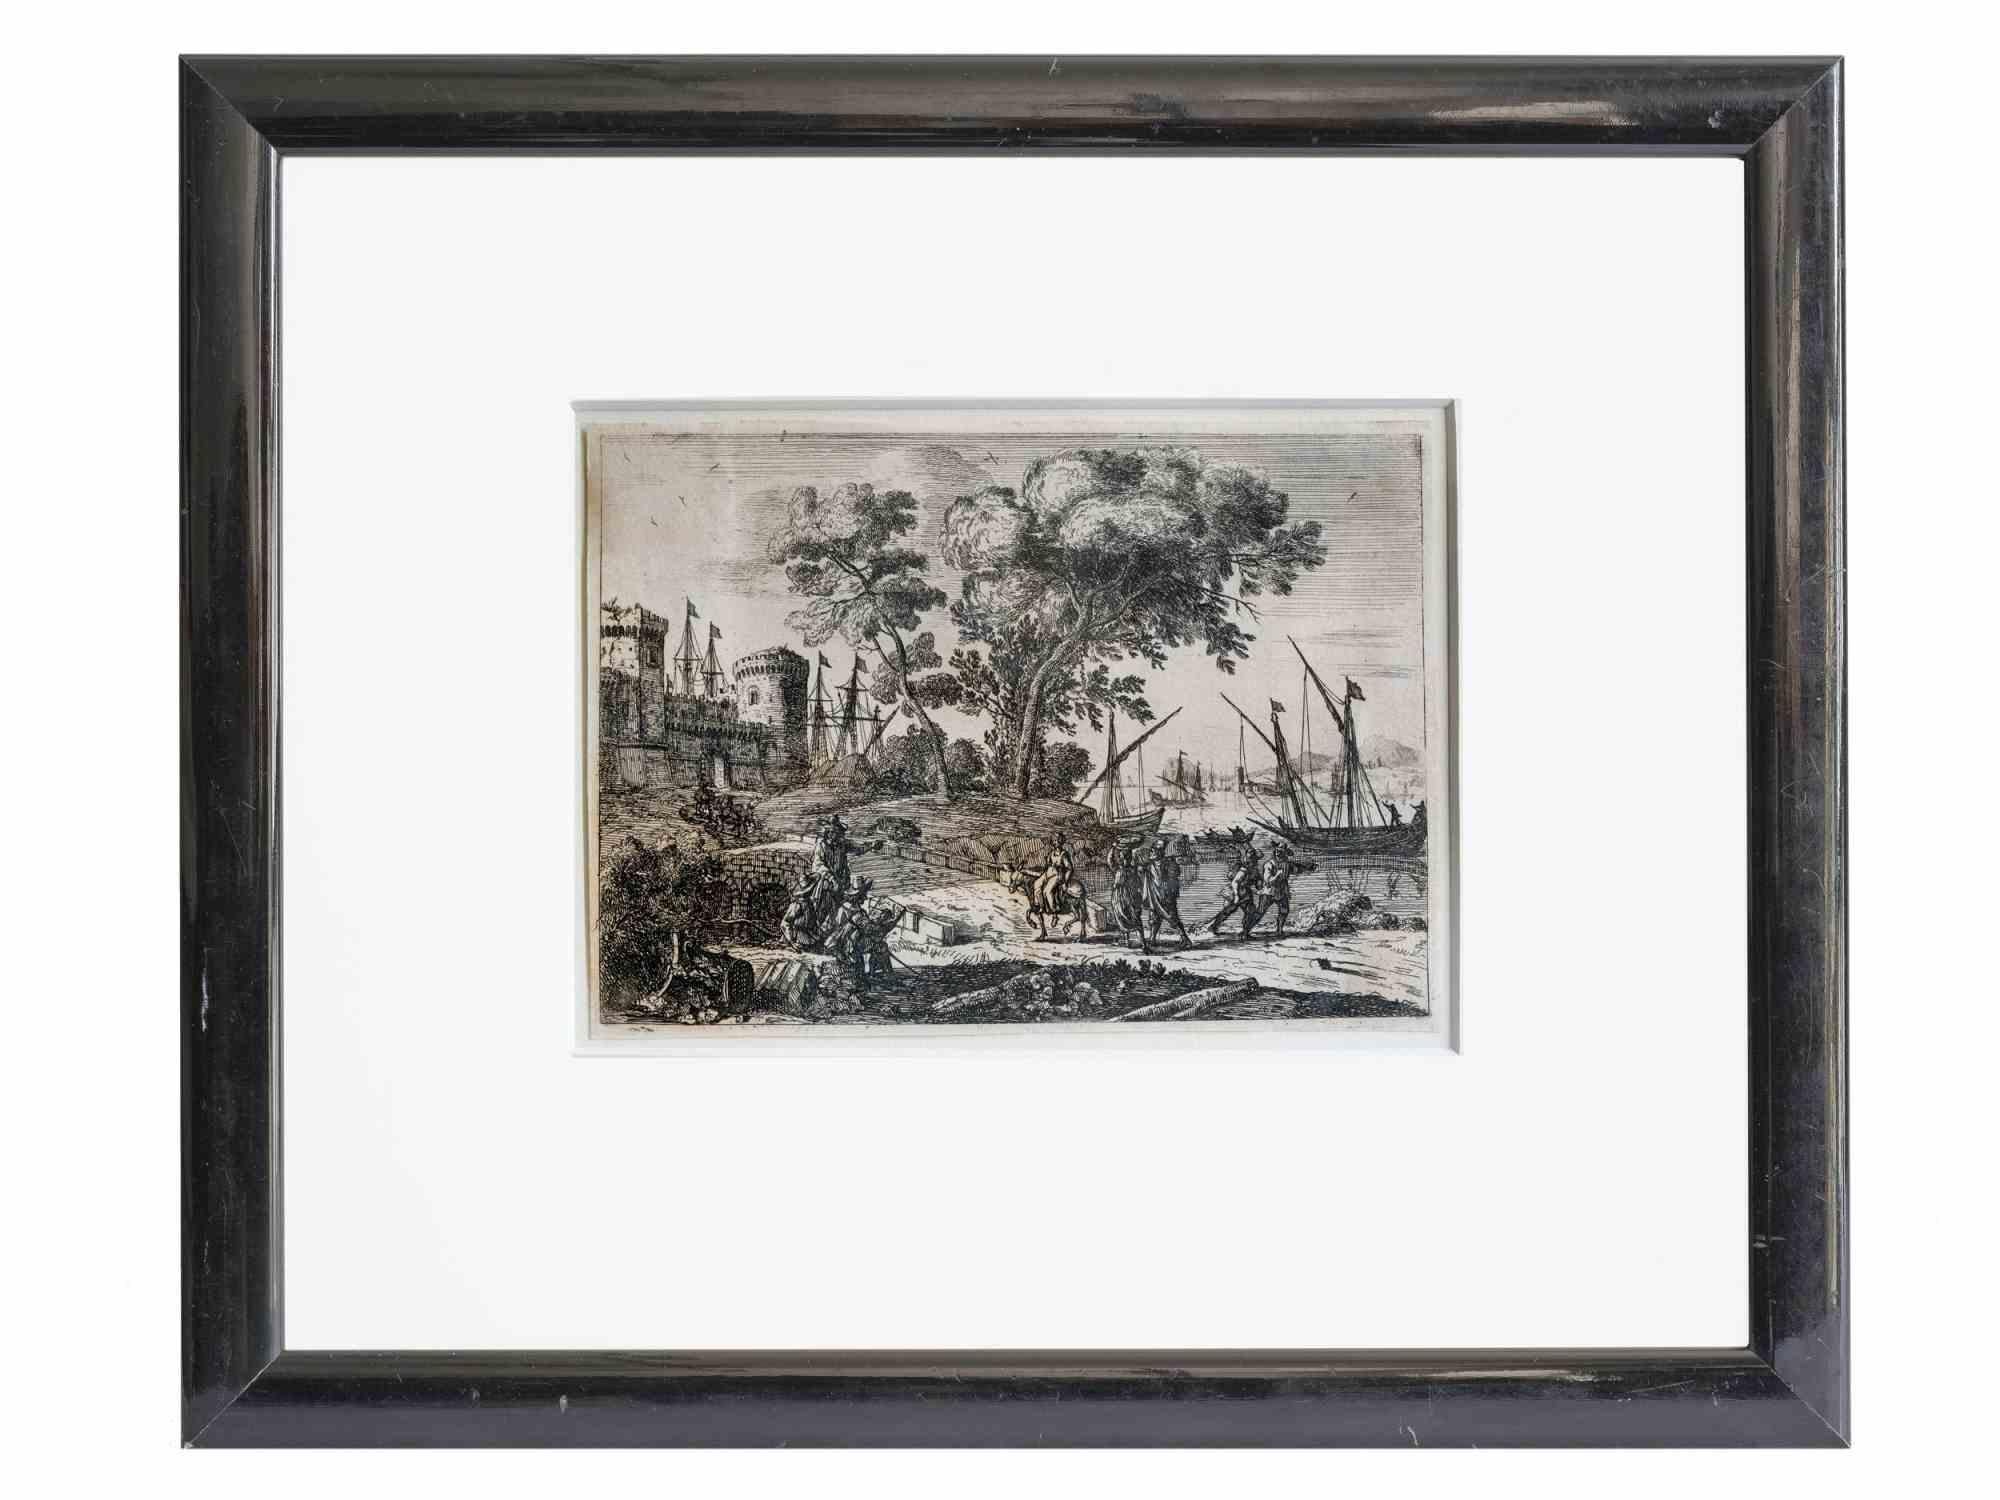 Landscape - Etching - 17th Century - Print by Unknown